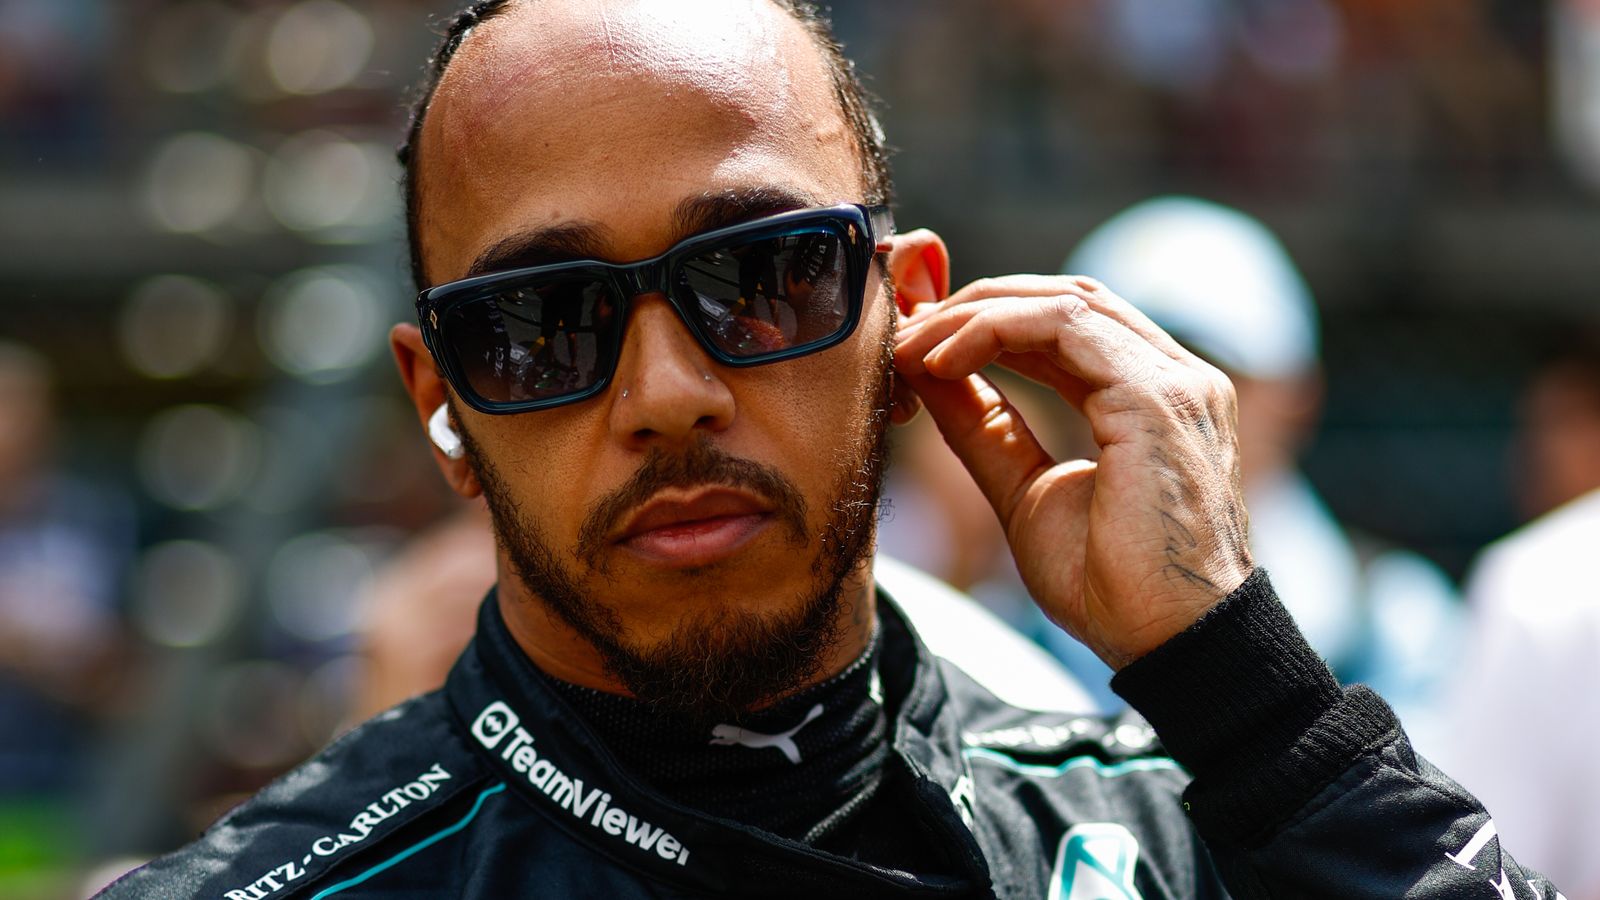 Lewis Hamilton: Mercedes driver bids to recover from 'shocking' Austria form at home British GP